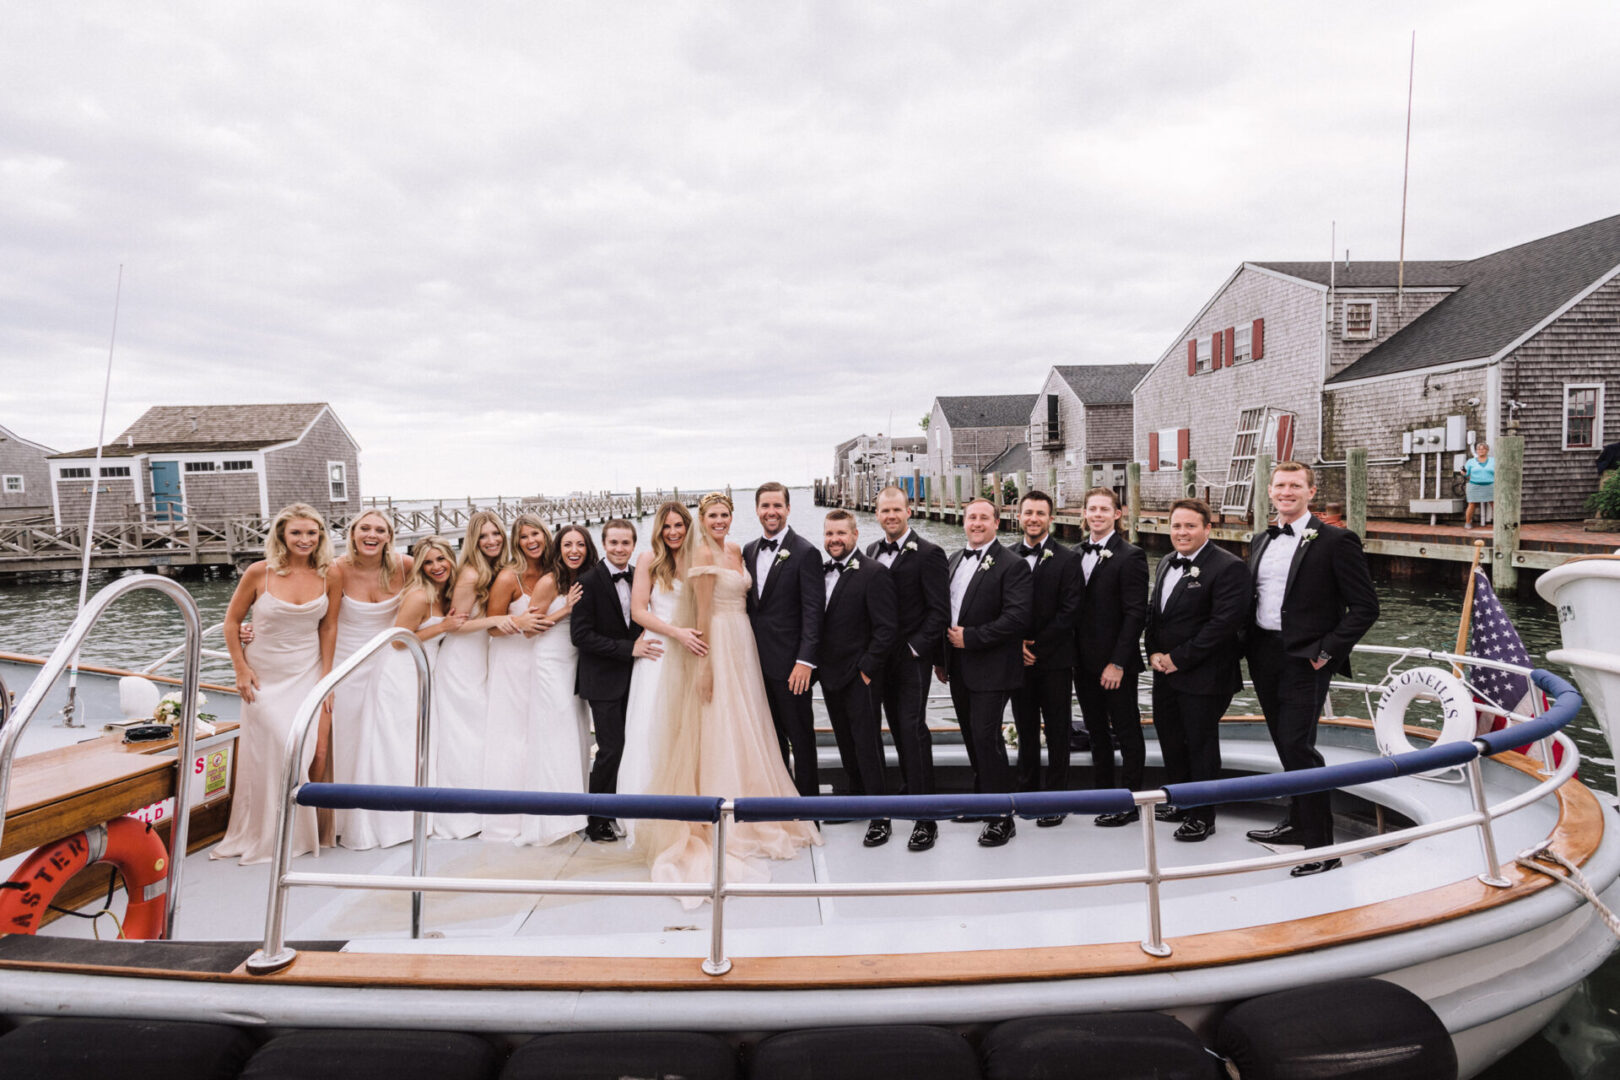 Guests are posing on a beautiful boat with the couple